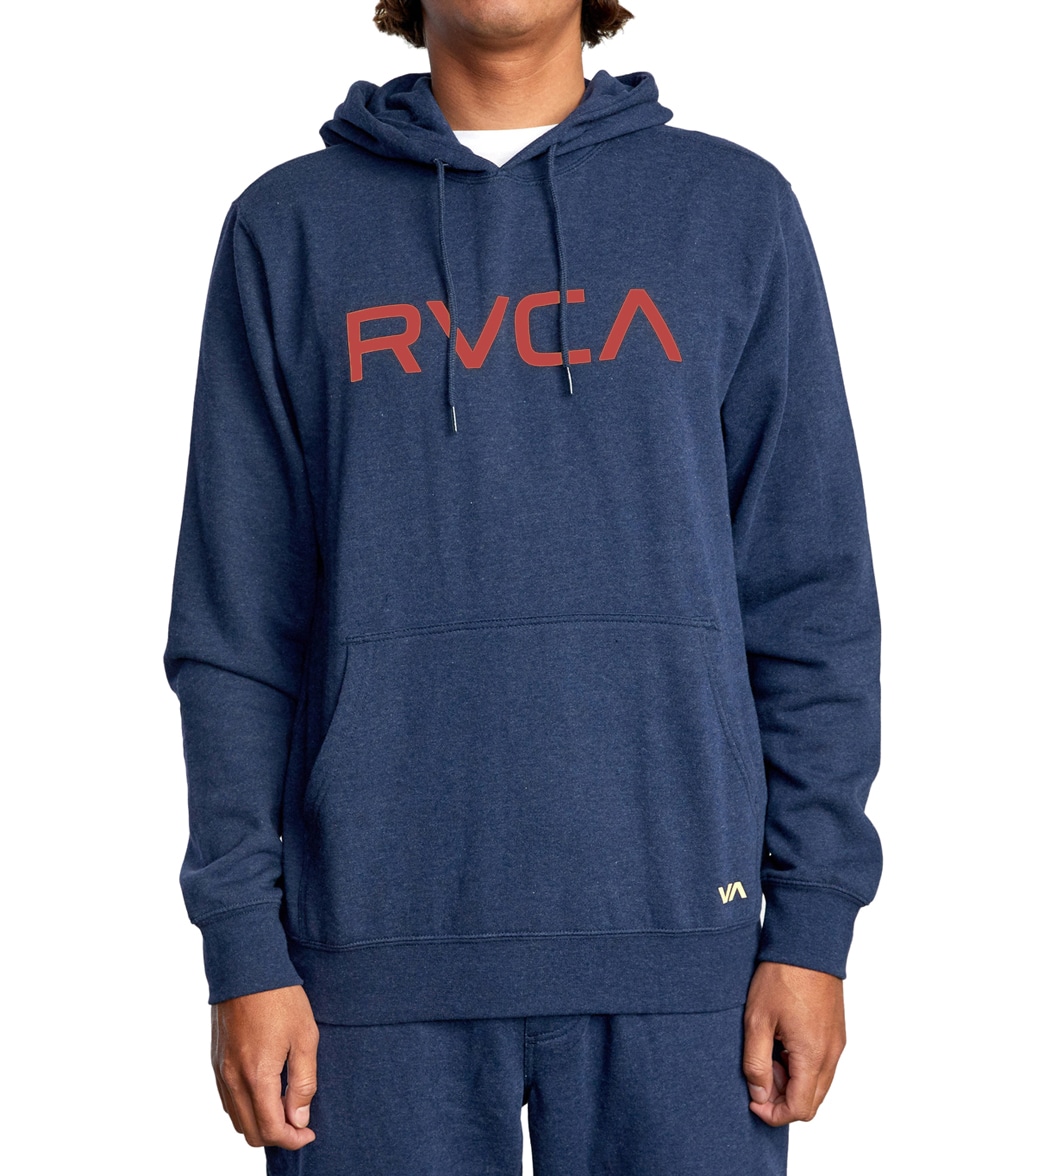 Rvca Men's Big Pullover Hoodie - Navy Large Cotton/Polyester - Swimoutlet.com